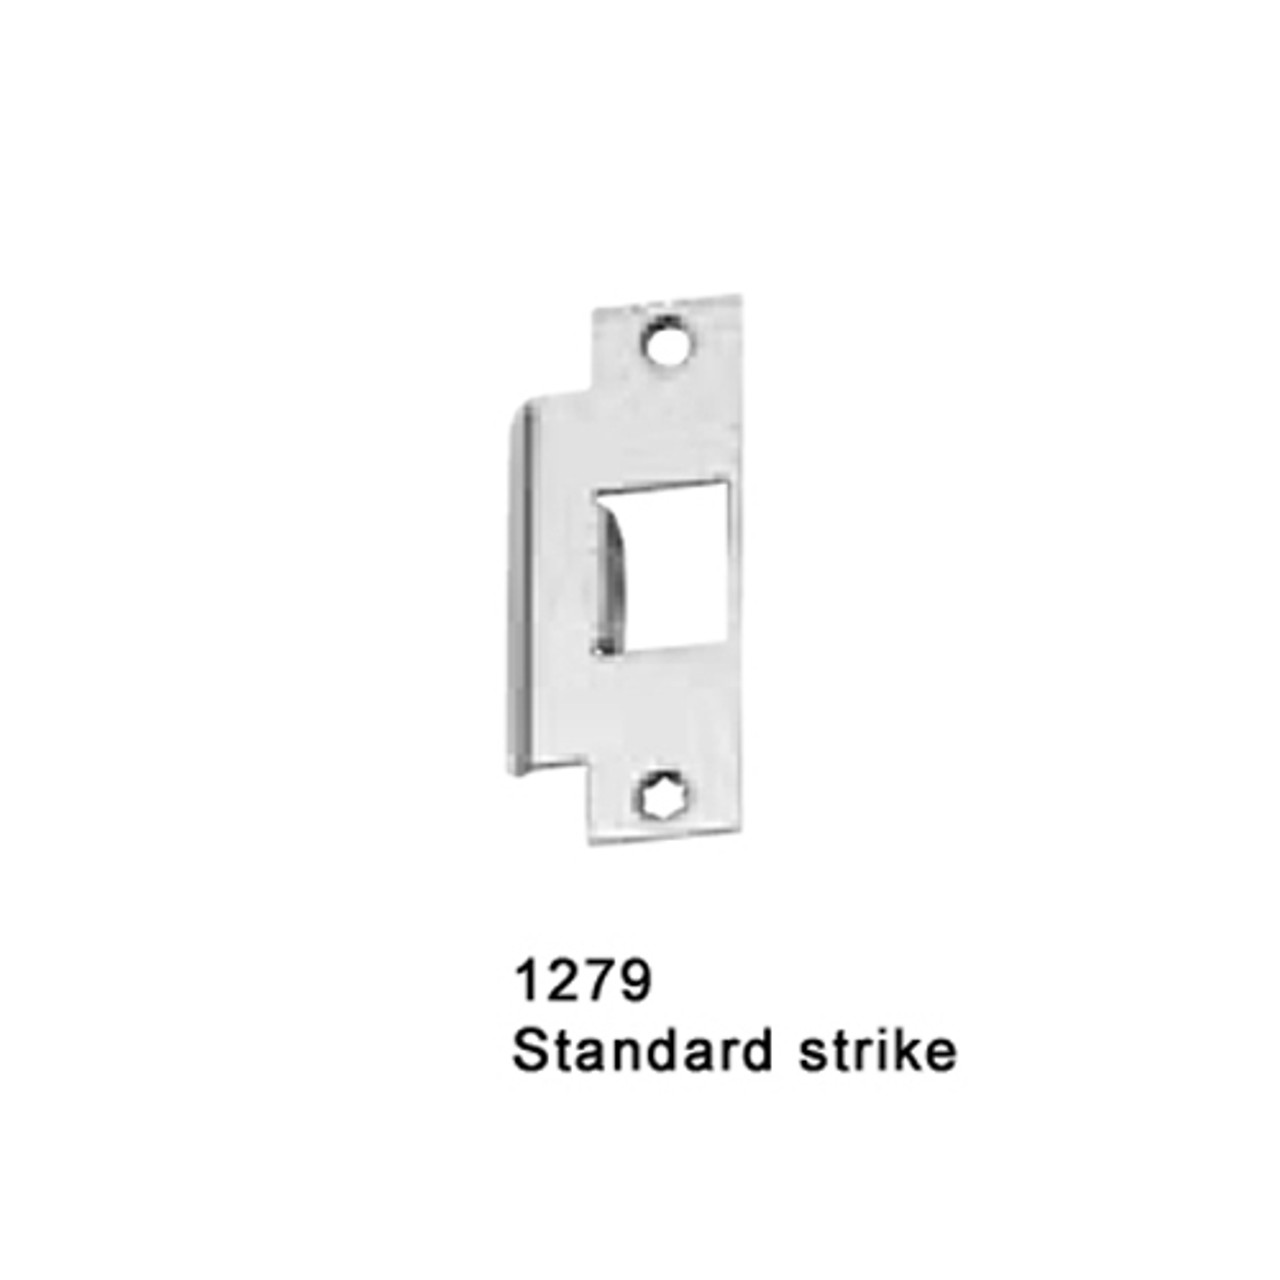 CD25-M-TP-BE-US10-3-LHR Falcon 25 Series Mortise Lock Devices 512TP-BE Thumbpiece Trim with Blank Escutcheon in Satin Bronze